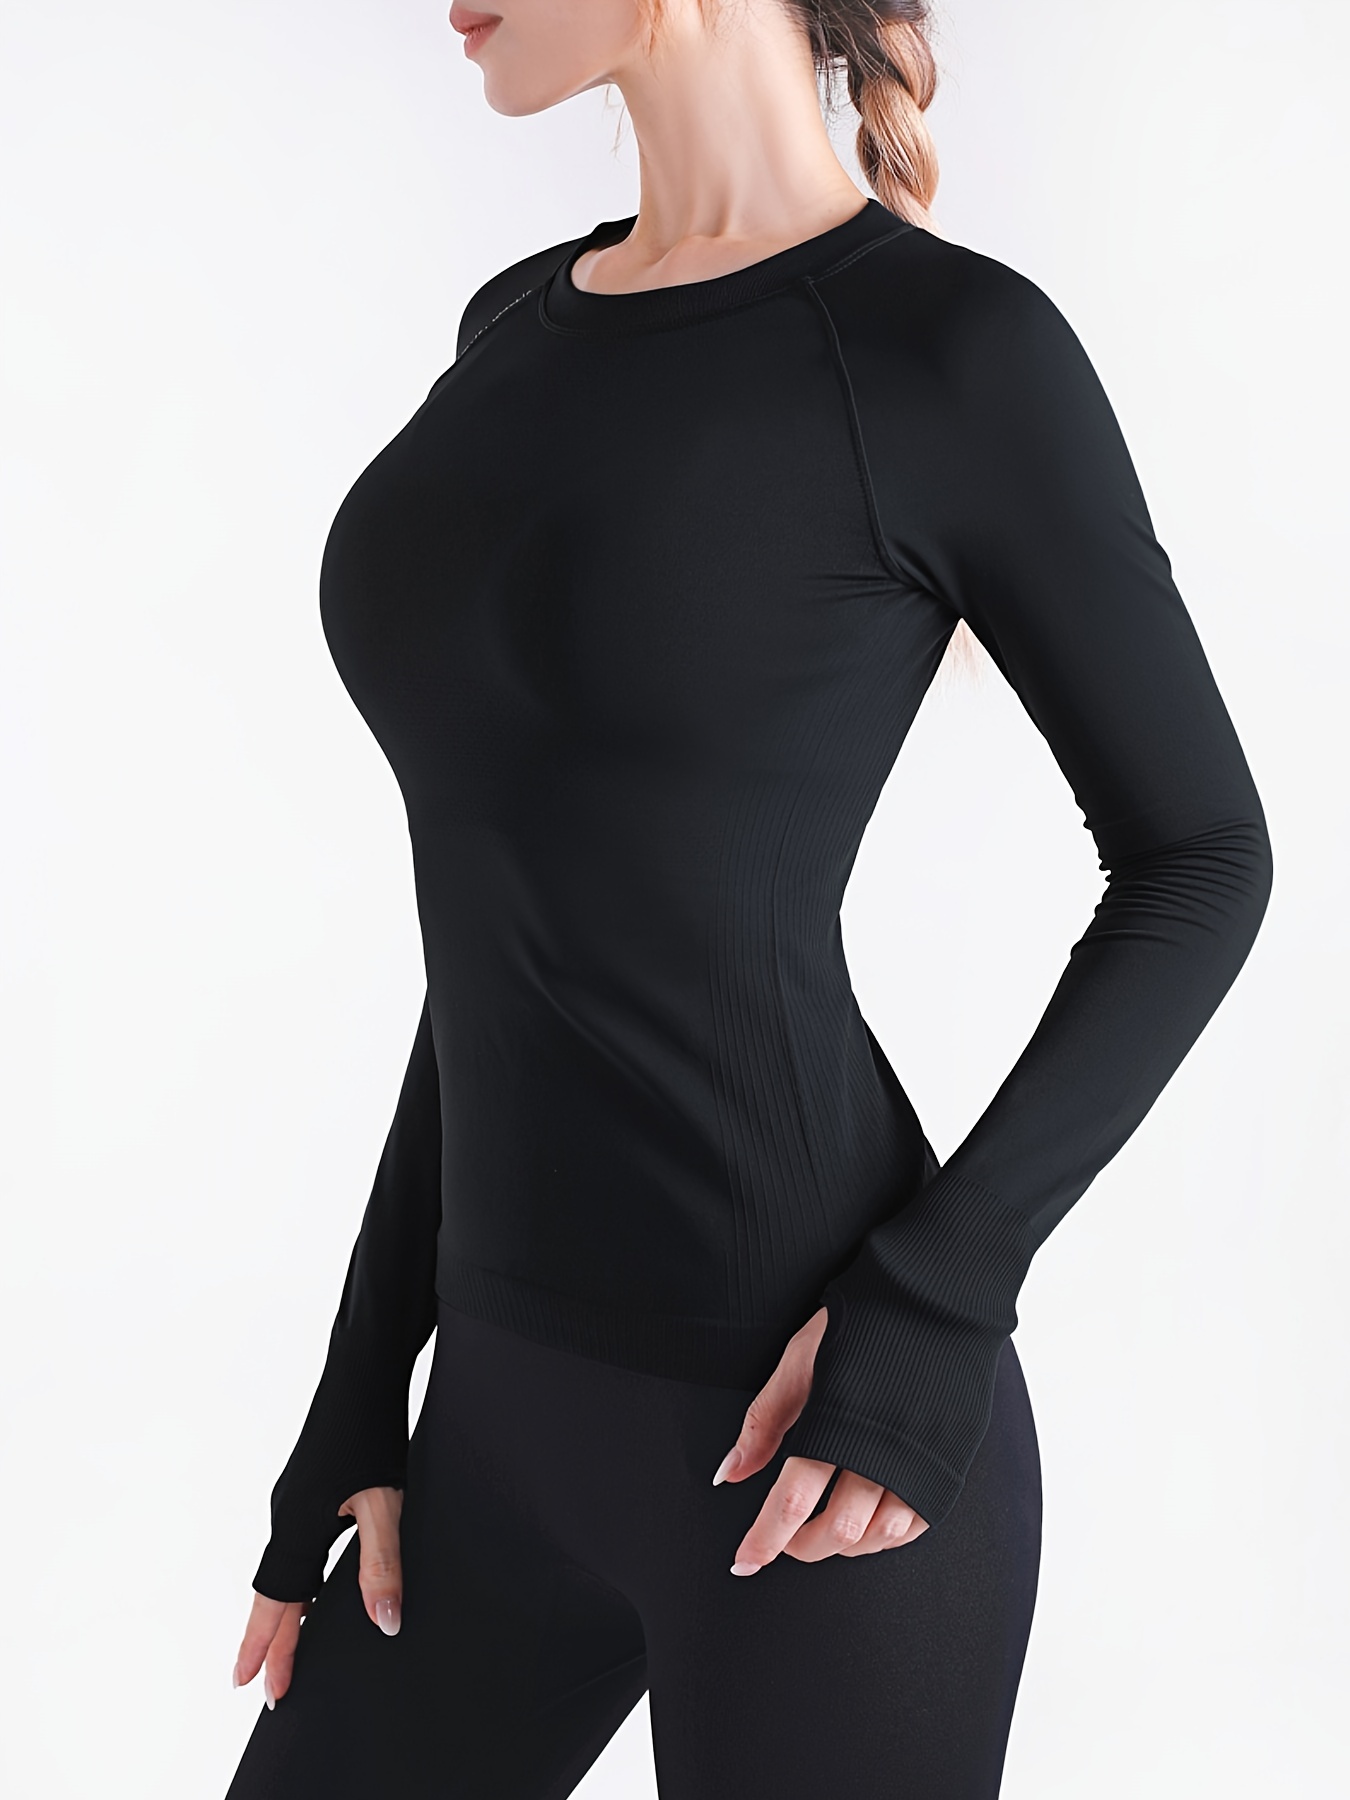 Long Sleeve Breathable Workout Tops for Women Activewear Quick